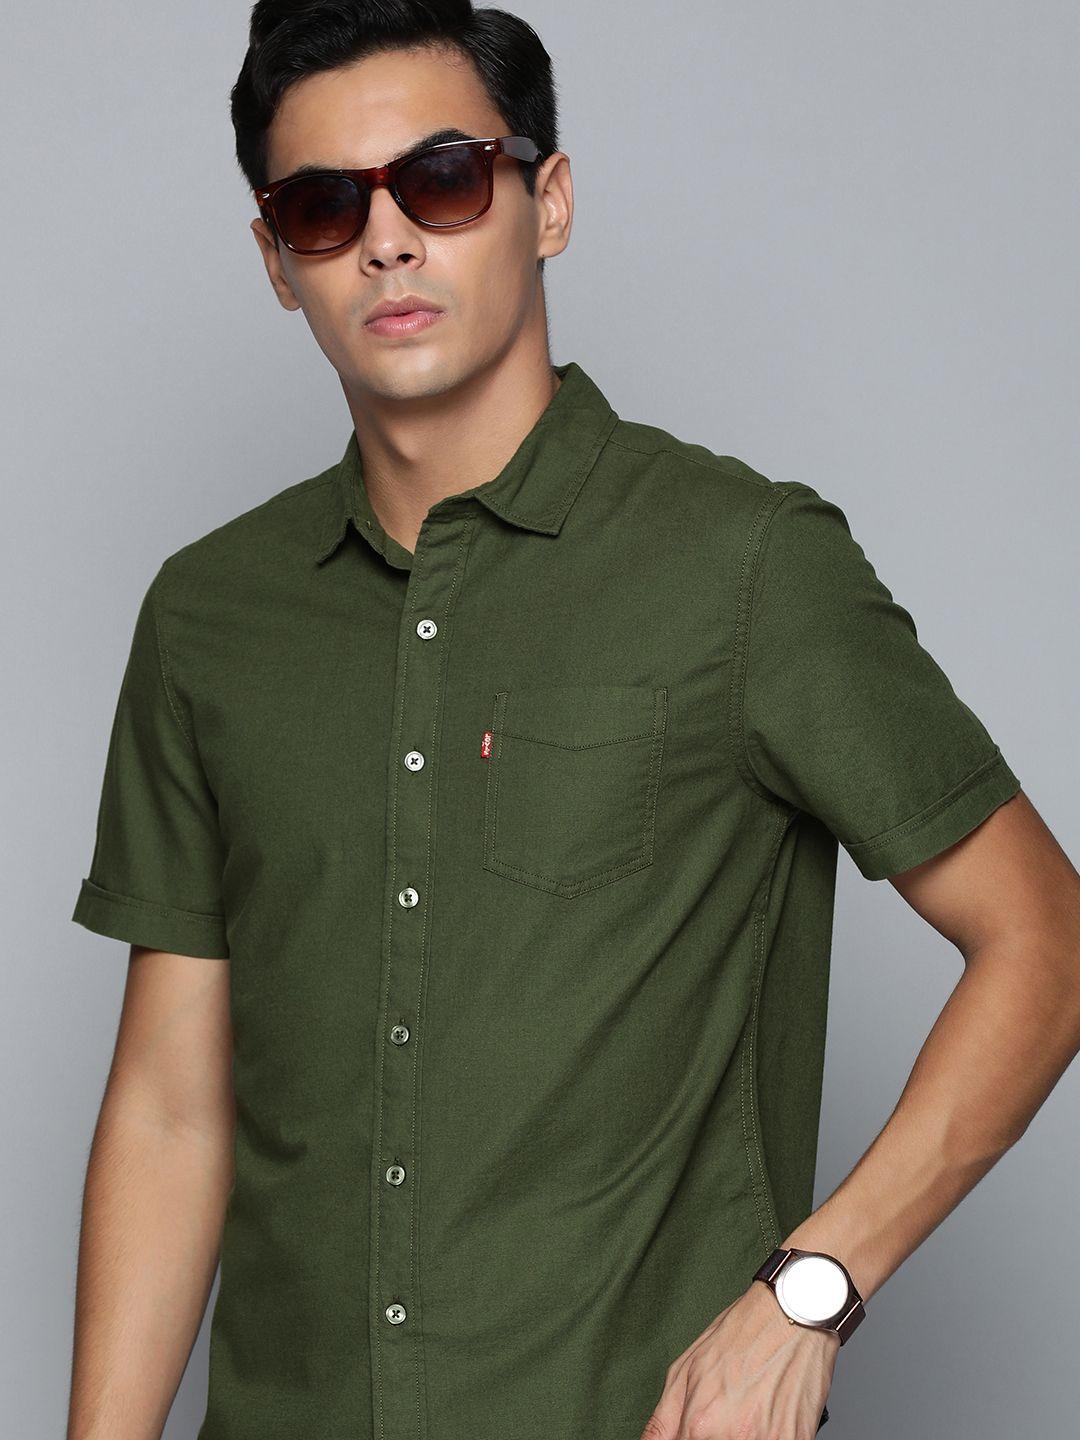 levis-men-dark-olive-green-solid-slim-fit-pure-cotton-casual-shirt